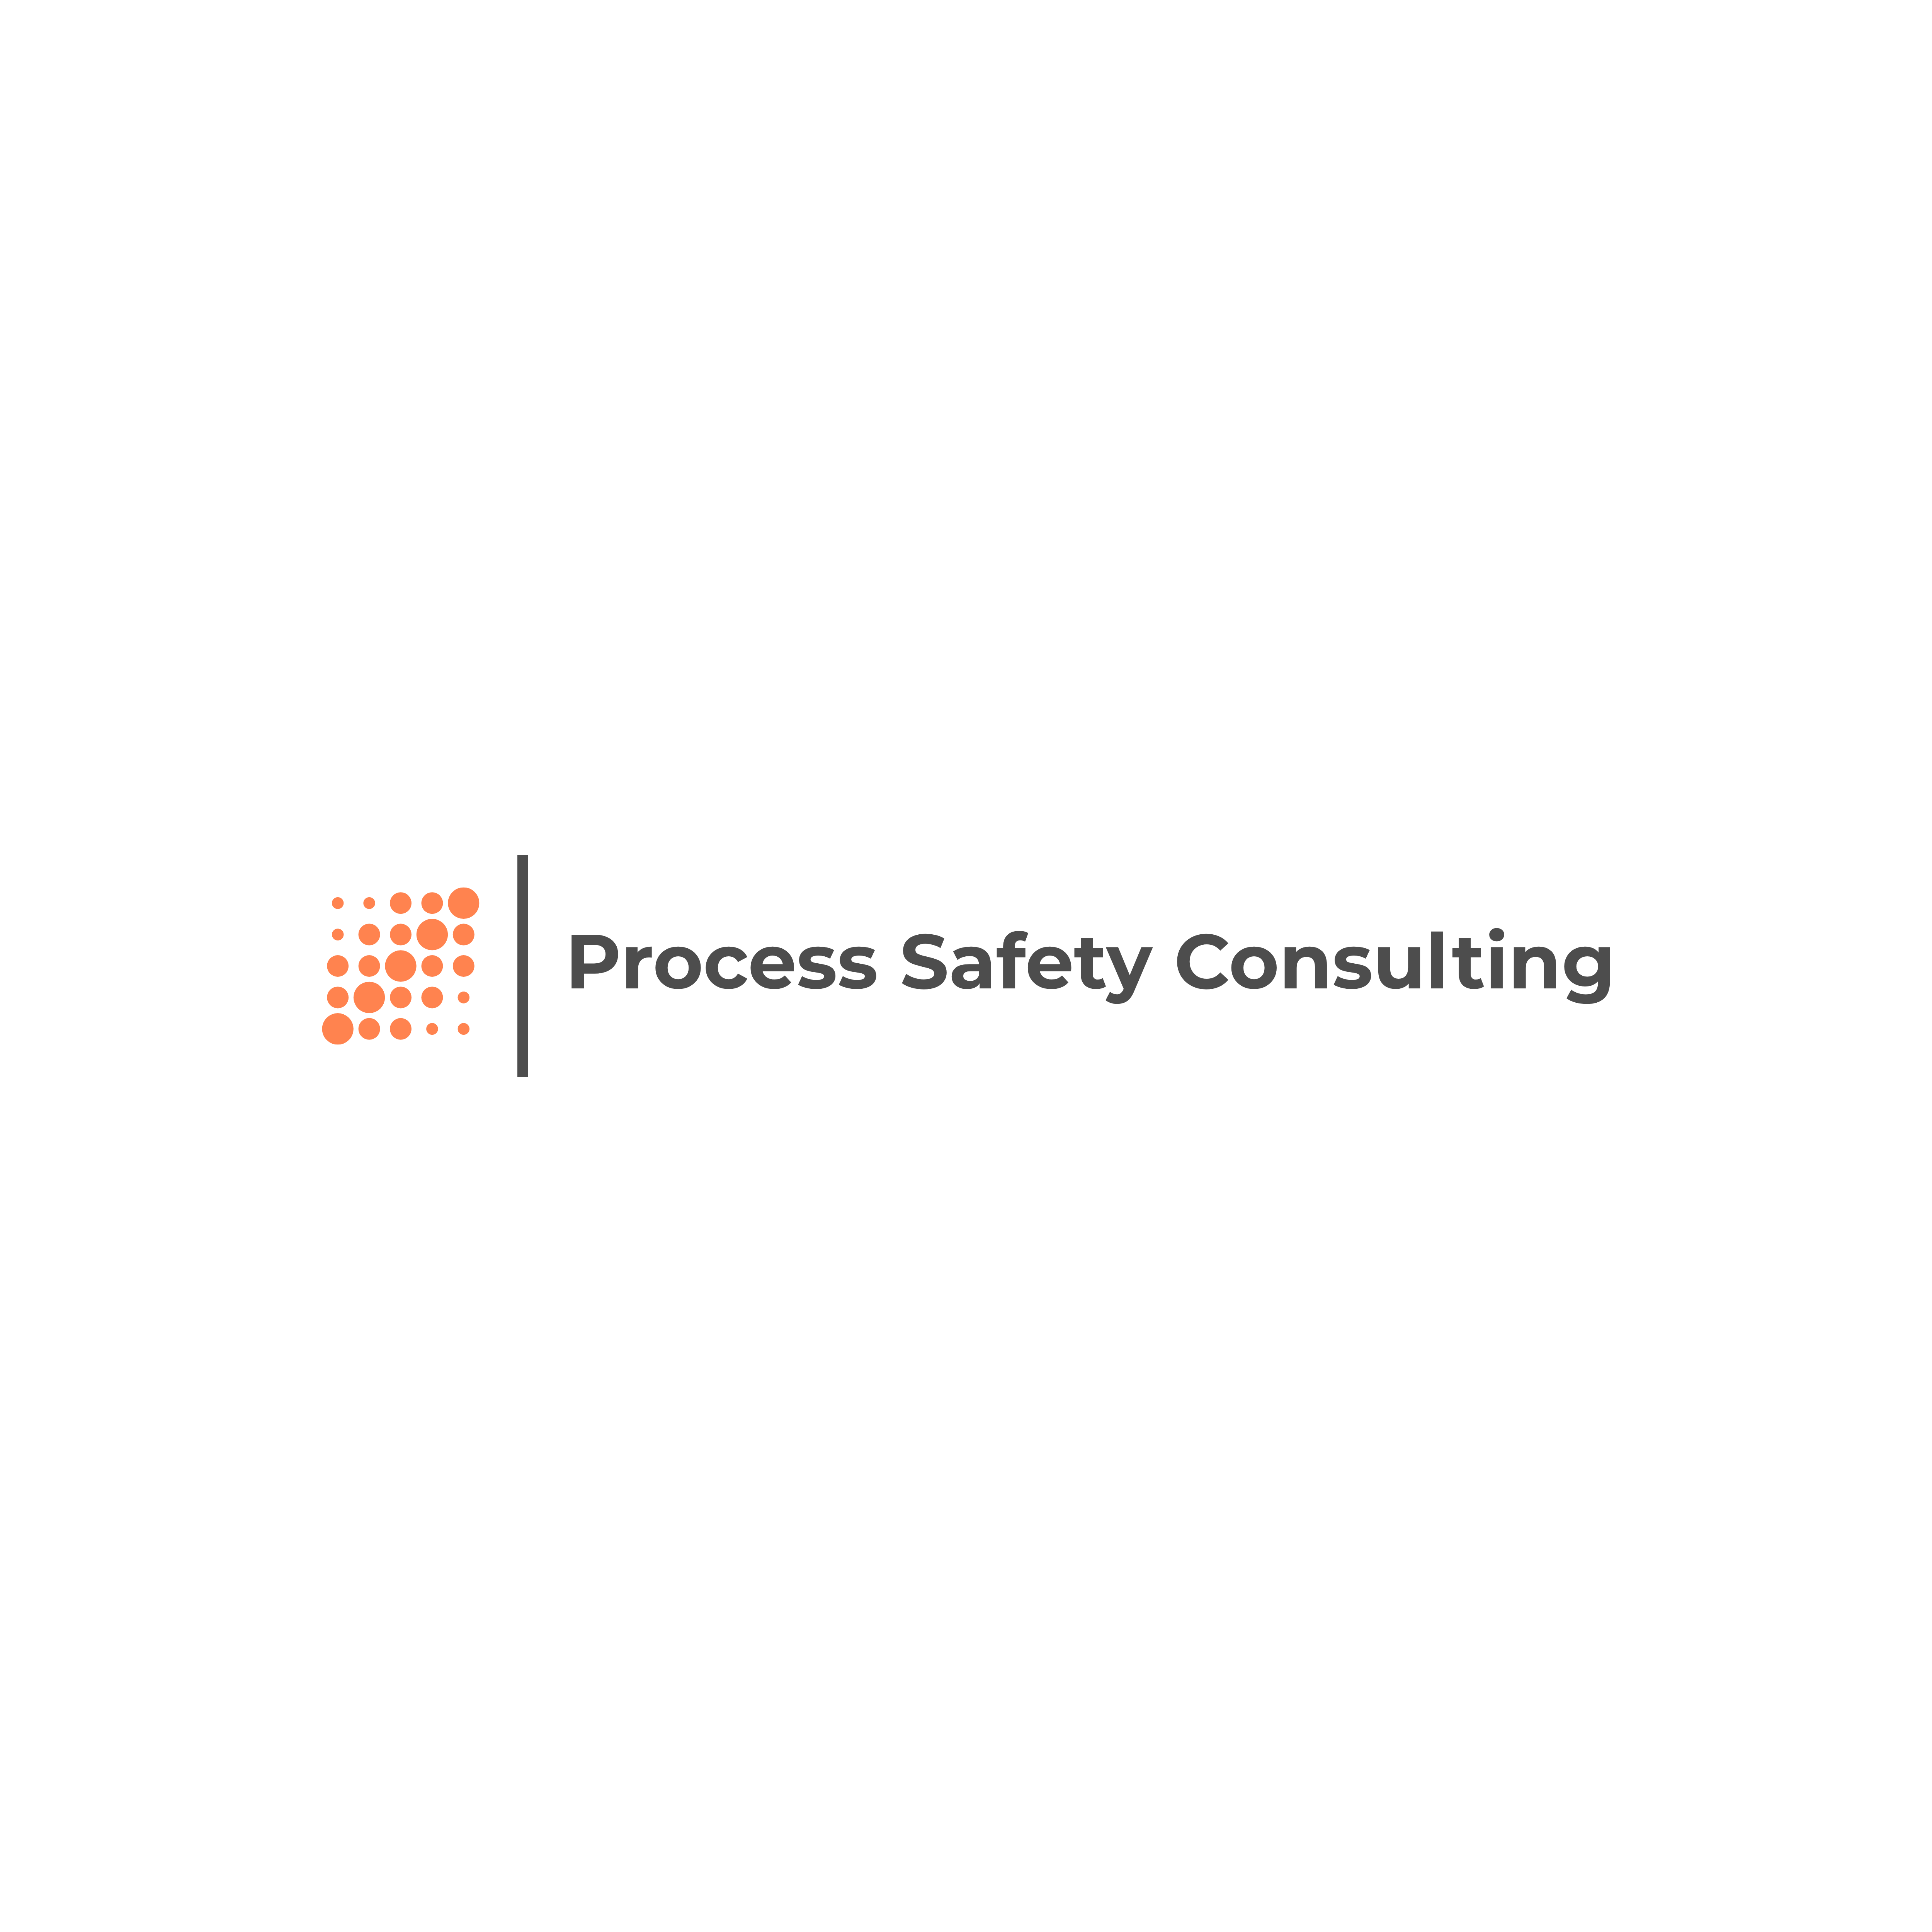 Process Safety Consulting